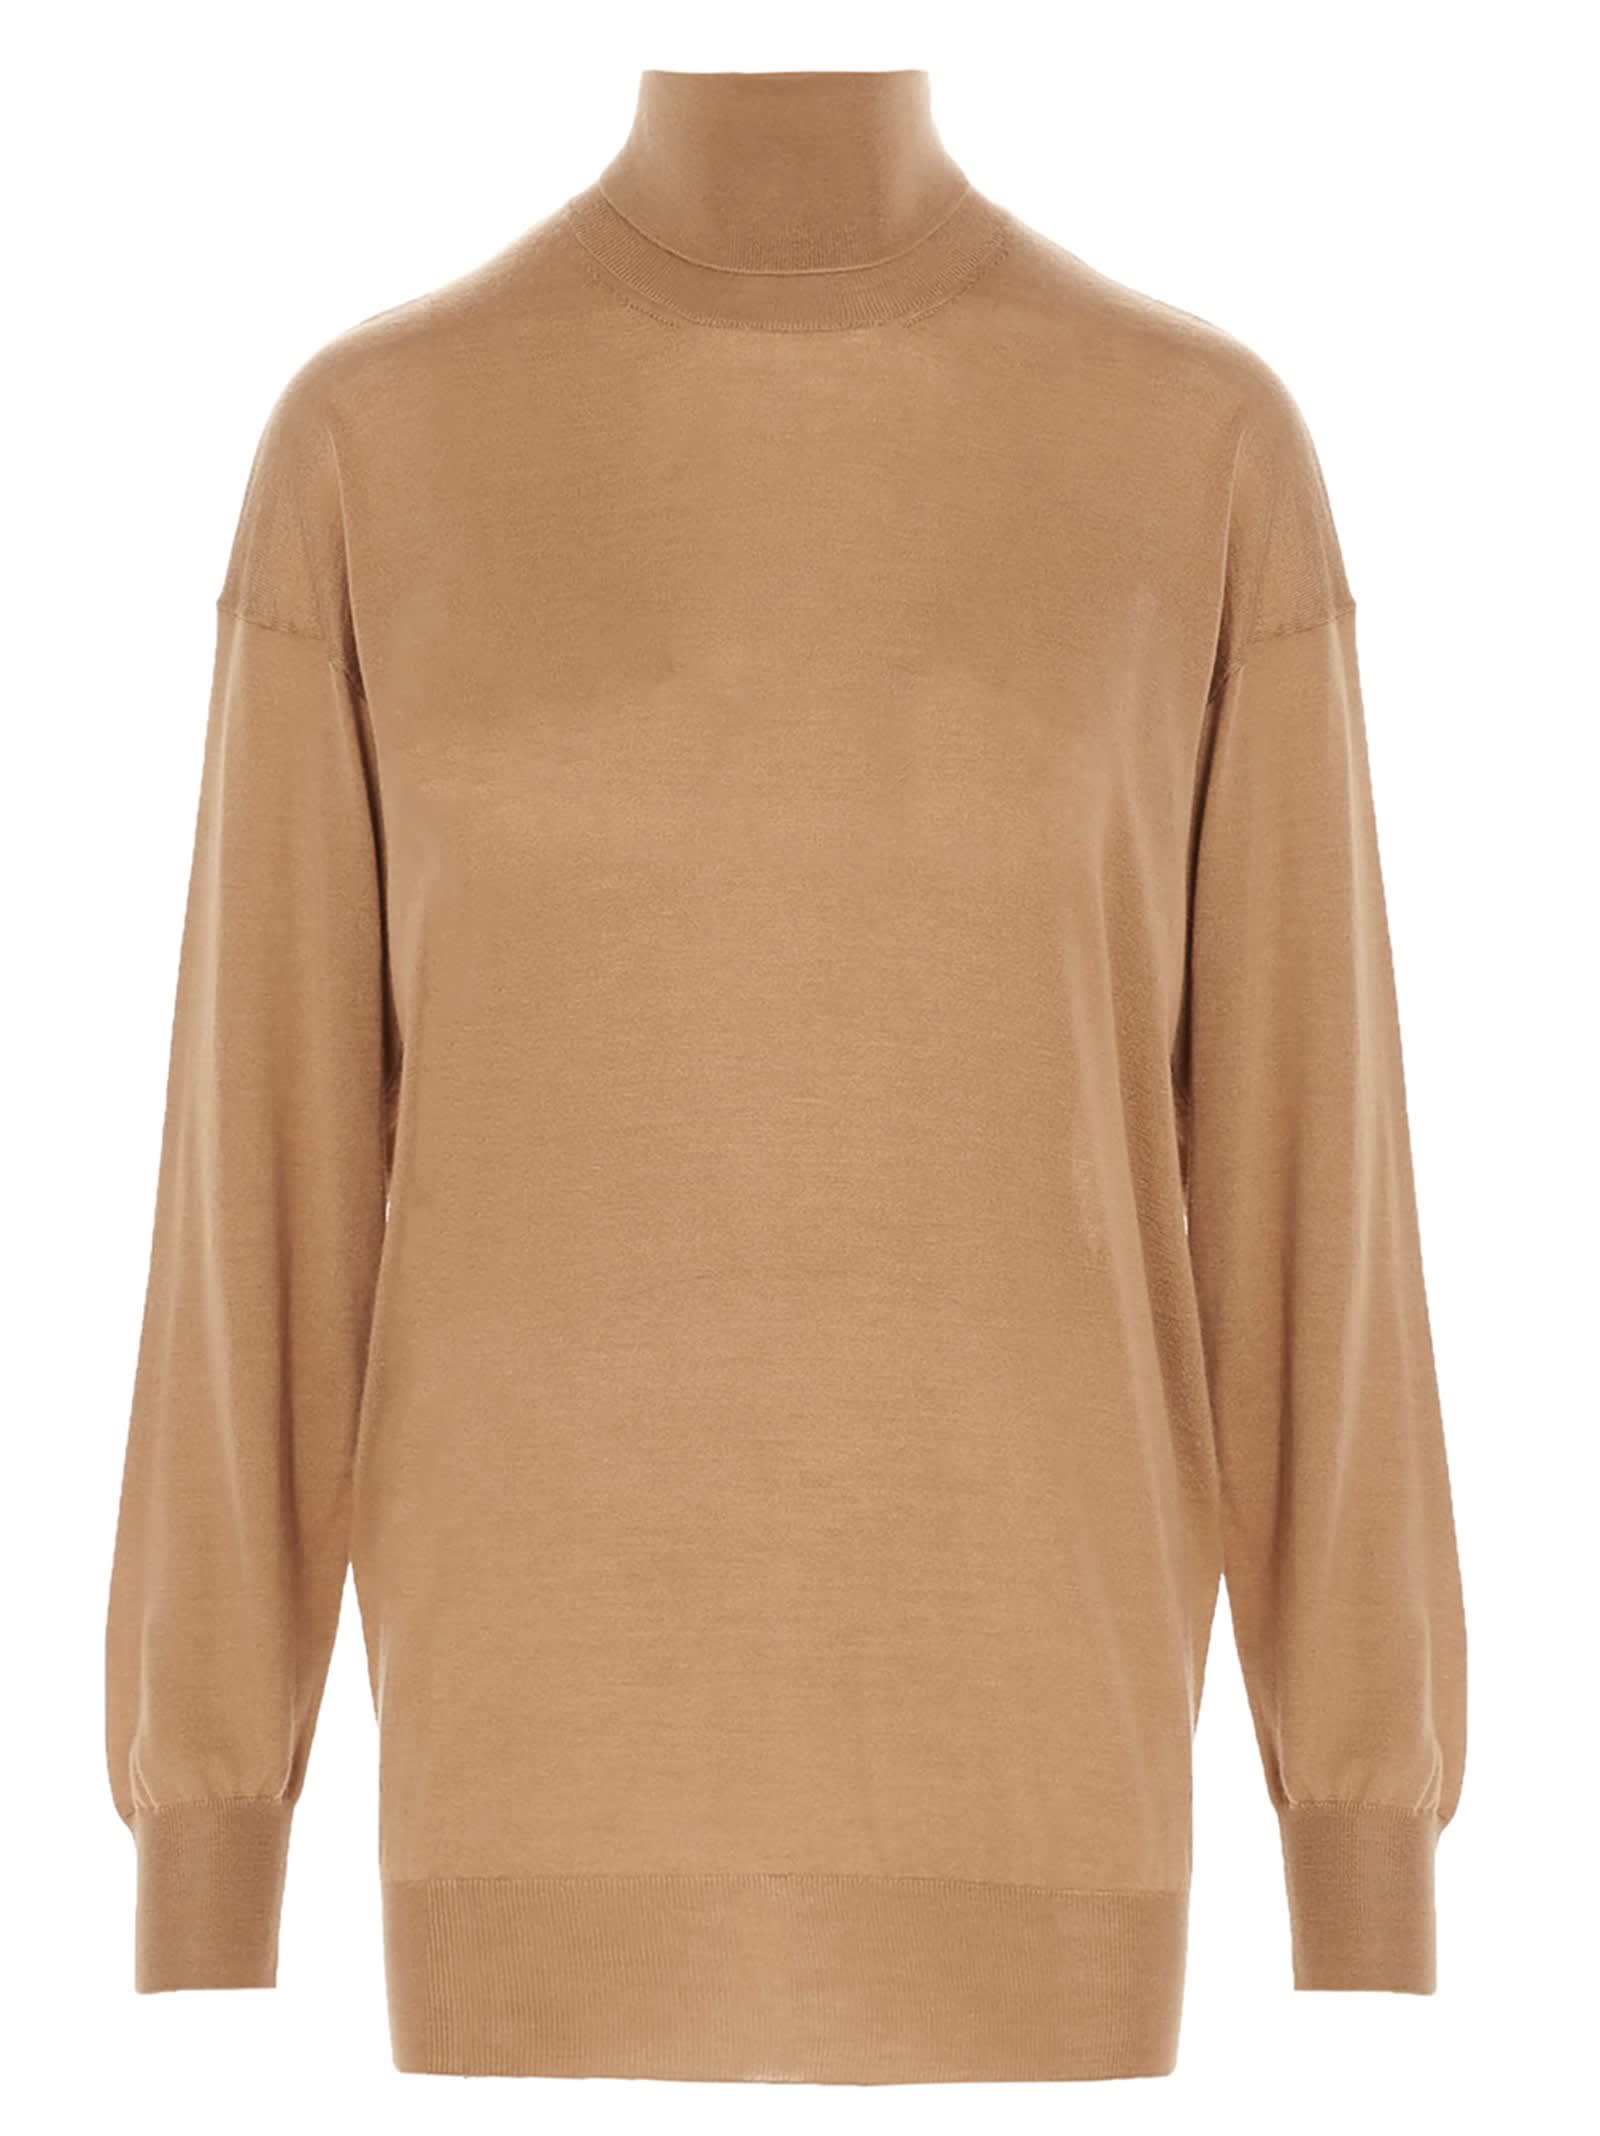 Tom Ford Cashmere Mixed Silk Sweater